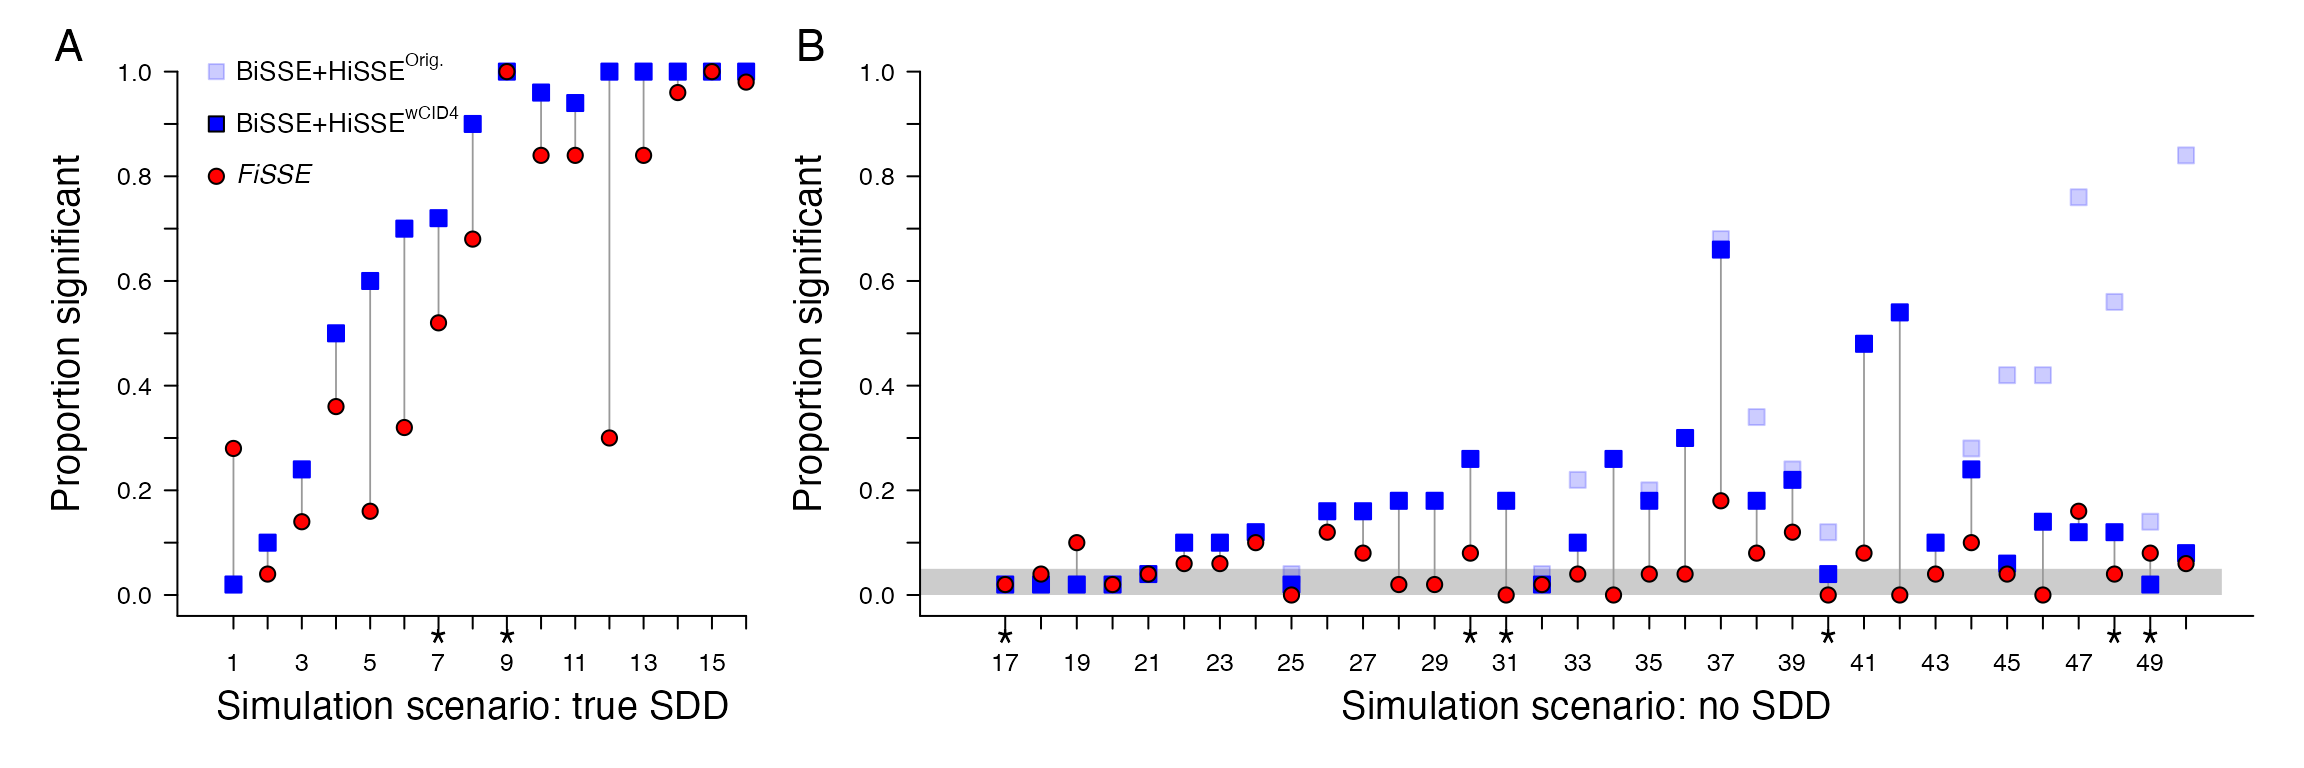 Reanalysis of the Rabosky and Goldberg (2017) when our 4-state character independent model, CID-4, is included in the model set (dark blue boxes). When compared against the fit of BiSSE, CID-2, and HiSSE, the (A) power to detect the trait-dependent diversification remains unchanged. For the trait-independent scenarios (B), there is almost always a reduction in the 'false positive' rate (as indicated by the difference in the position of the light blue and dark blue boxes), and in many cases the reduction is substantial.